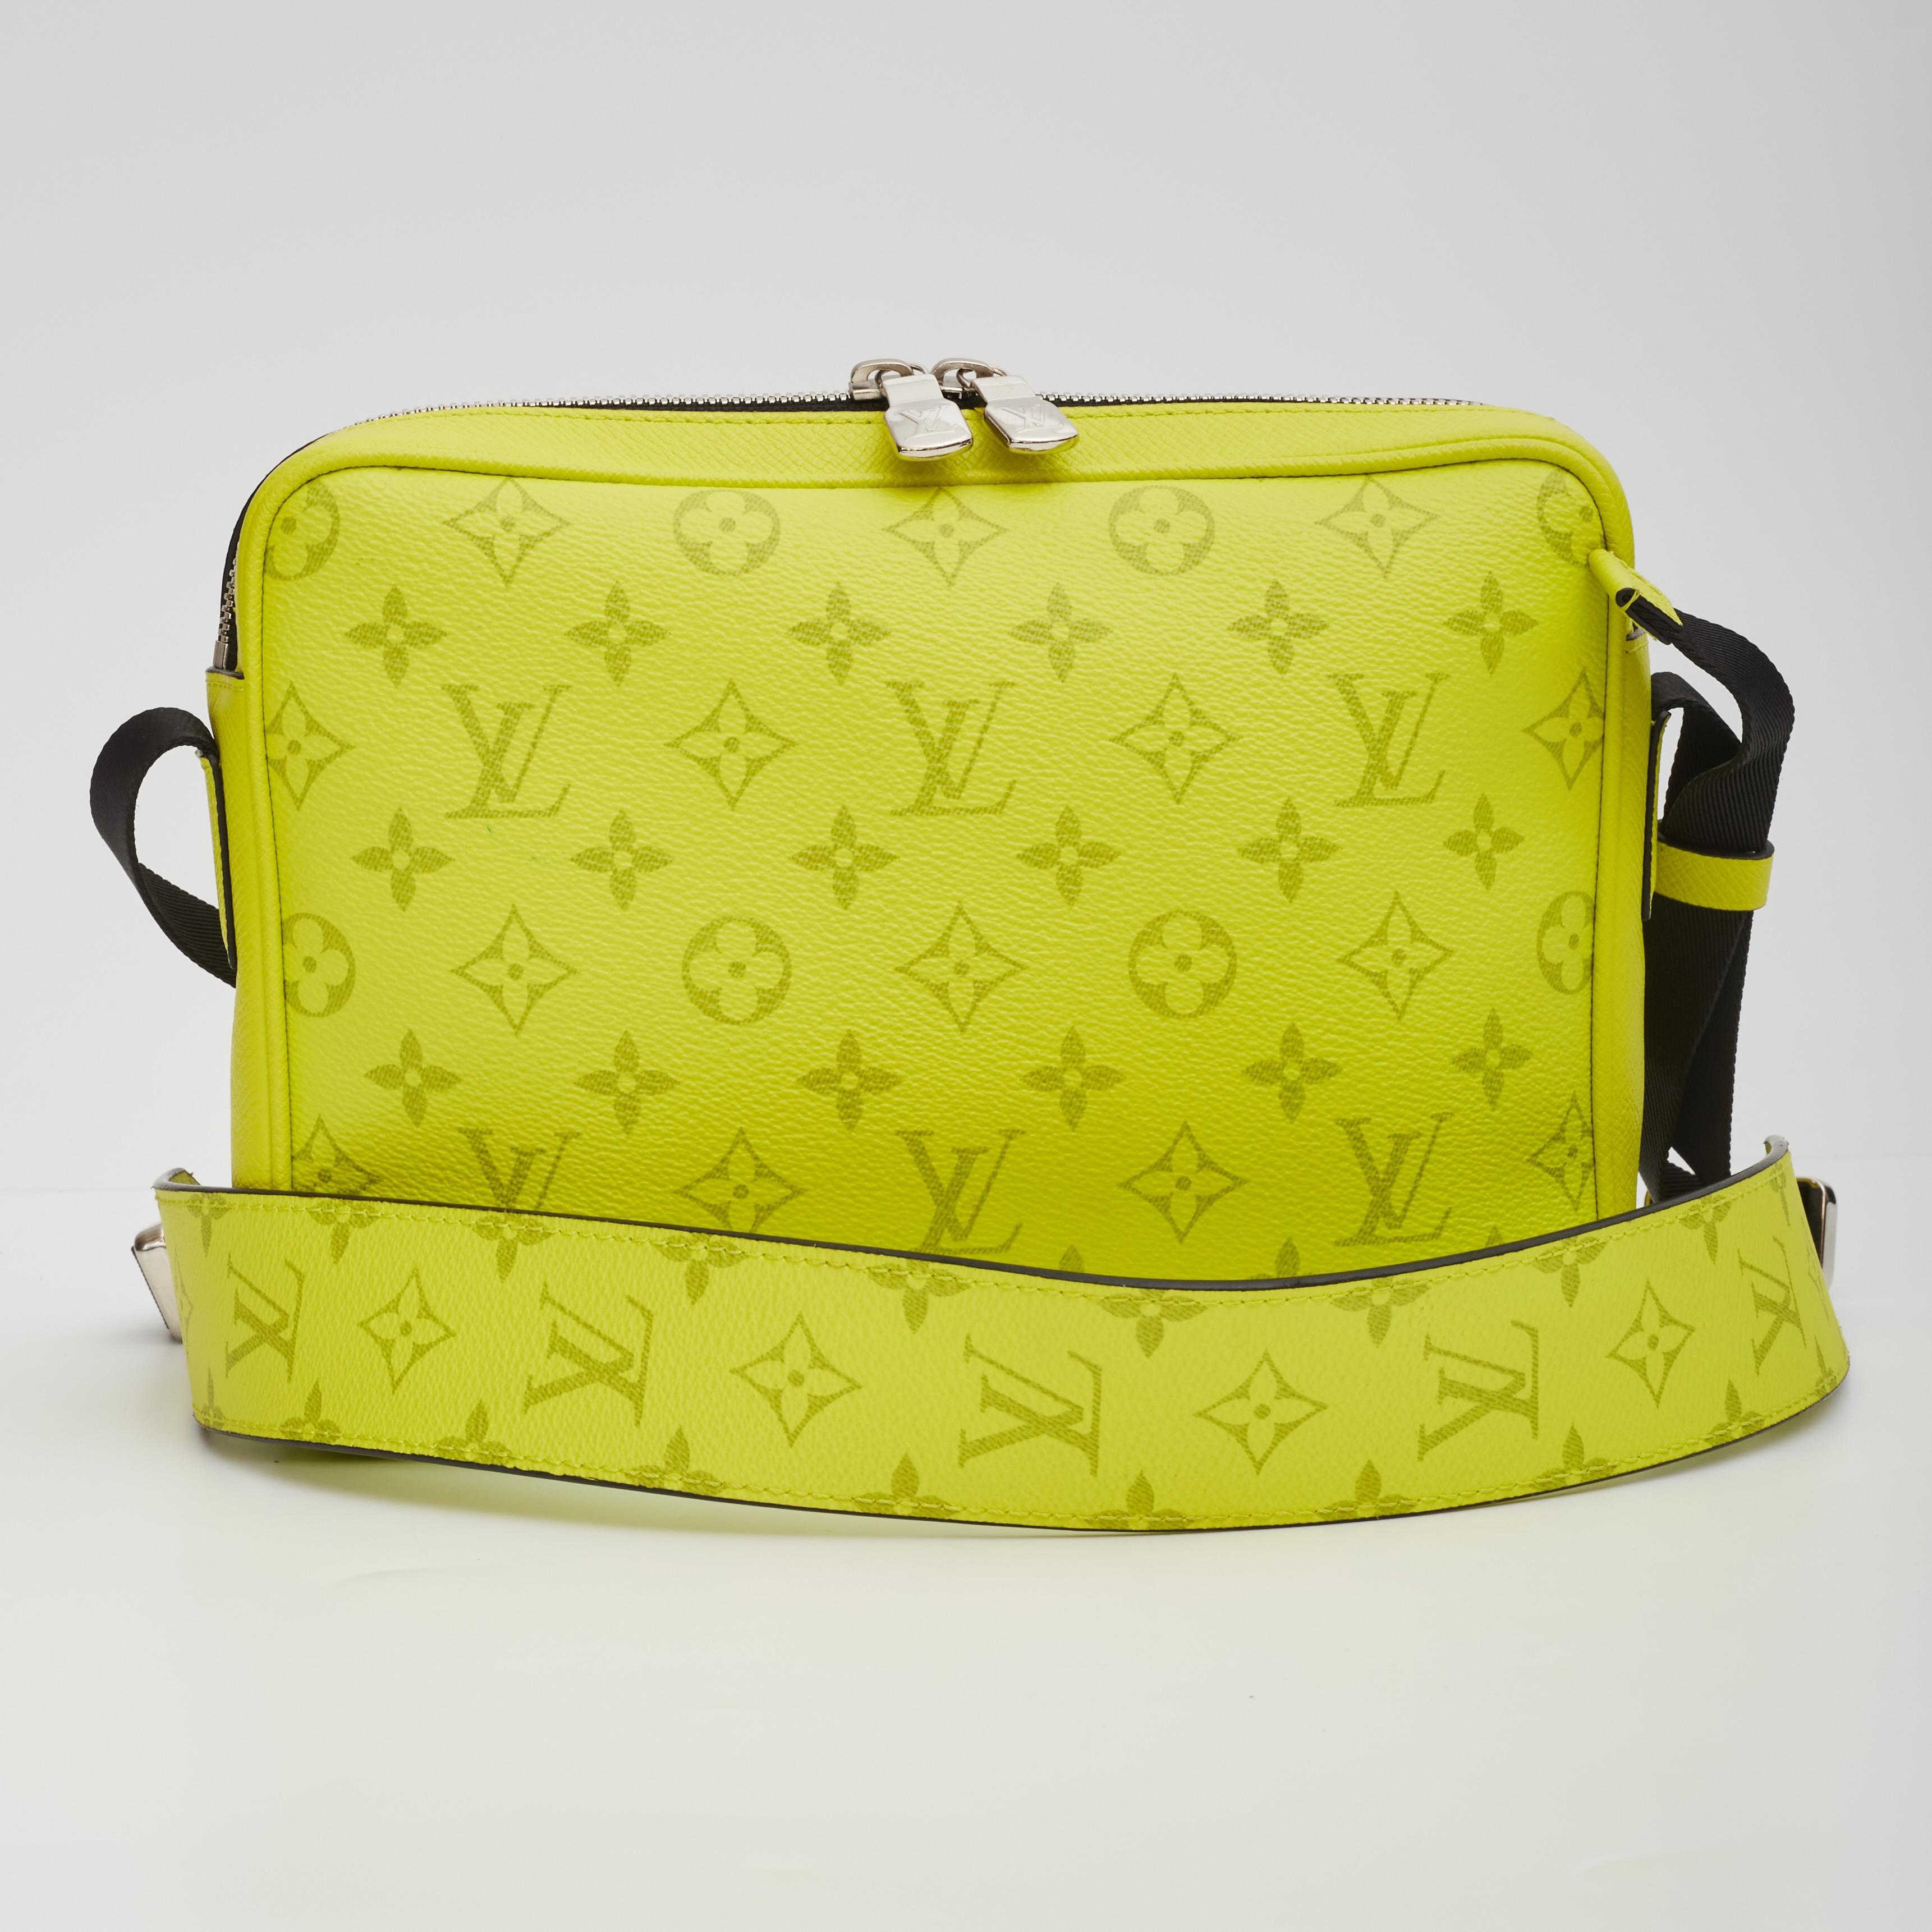 Louis Vuitton Messenger Bag. From the 2019 Collection. Yellow Taiga Leather. LV Monogram. Silver-Tone Hardware. Single Adjustable Shoulder Strap. Single Exterior Pocket. Canvas Lining & Single Interior Pocket. Zip Closure at Top.

Color: